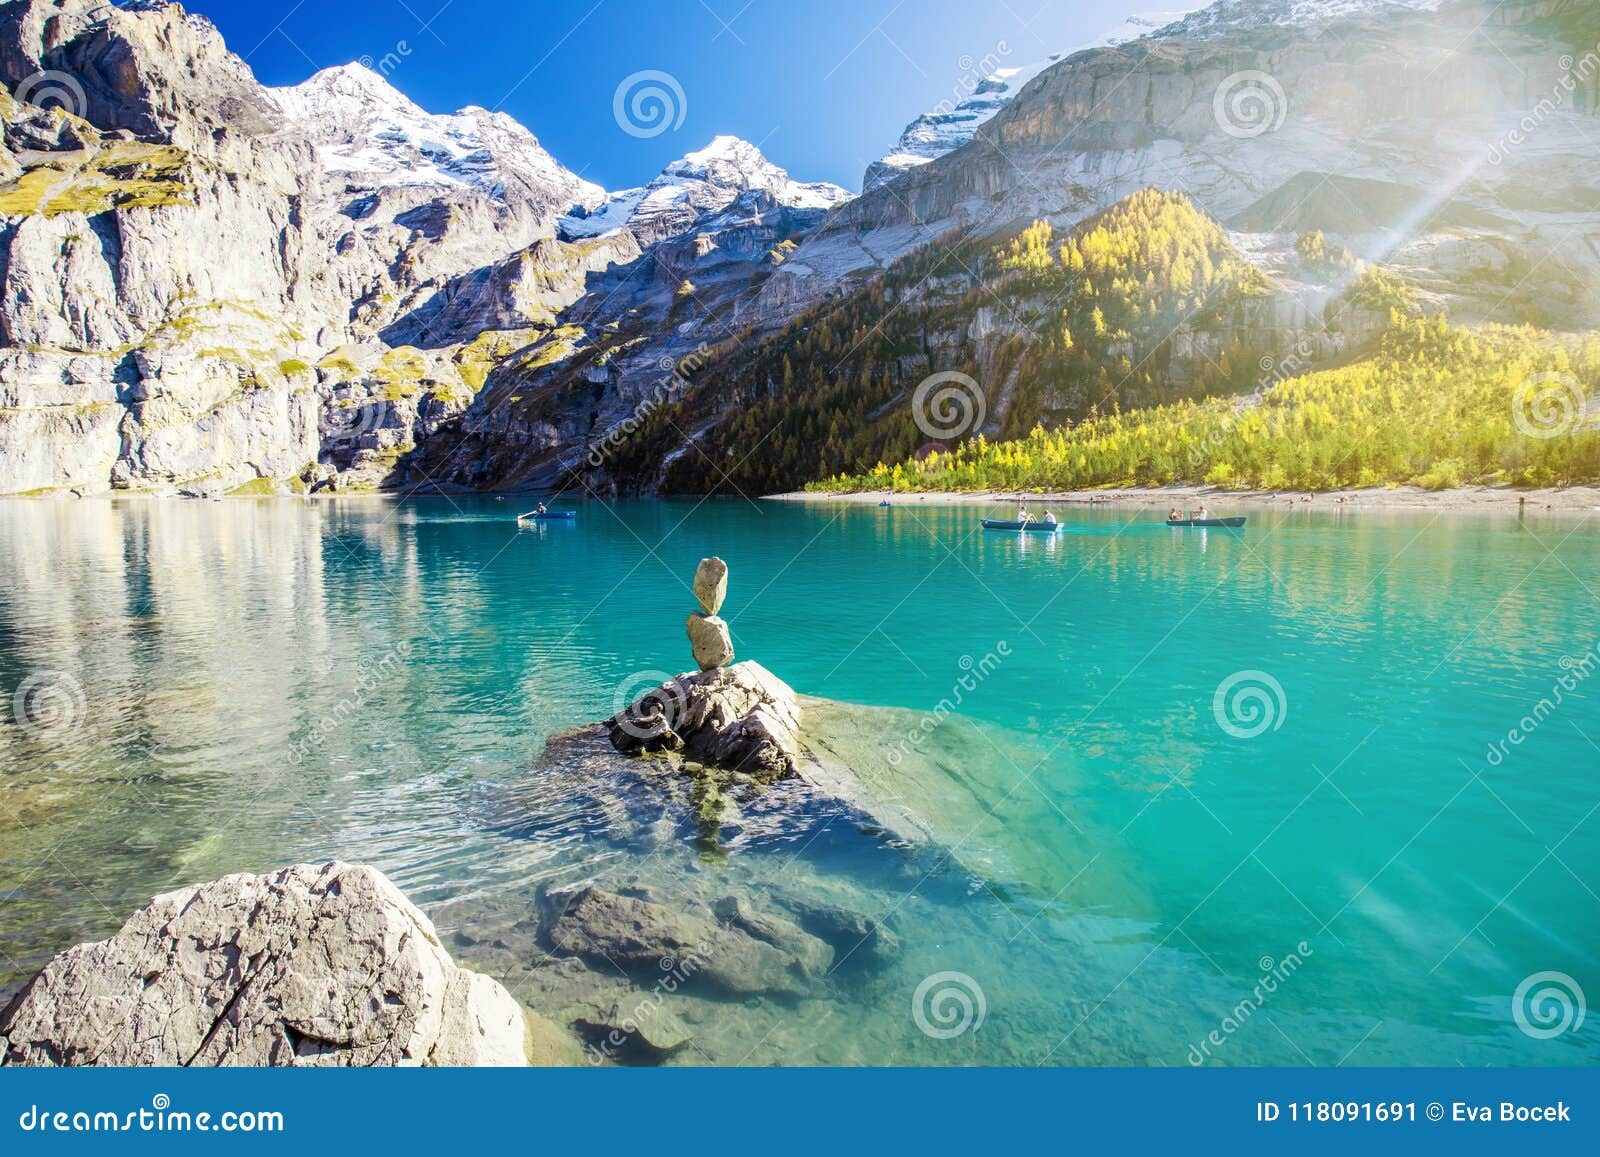 amazing tourquise oeschinnensee with waterfalls, wooden chalet and swiss alps, berner oberland, switzerland